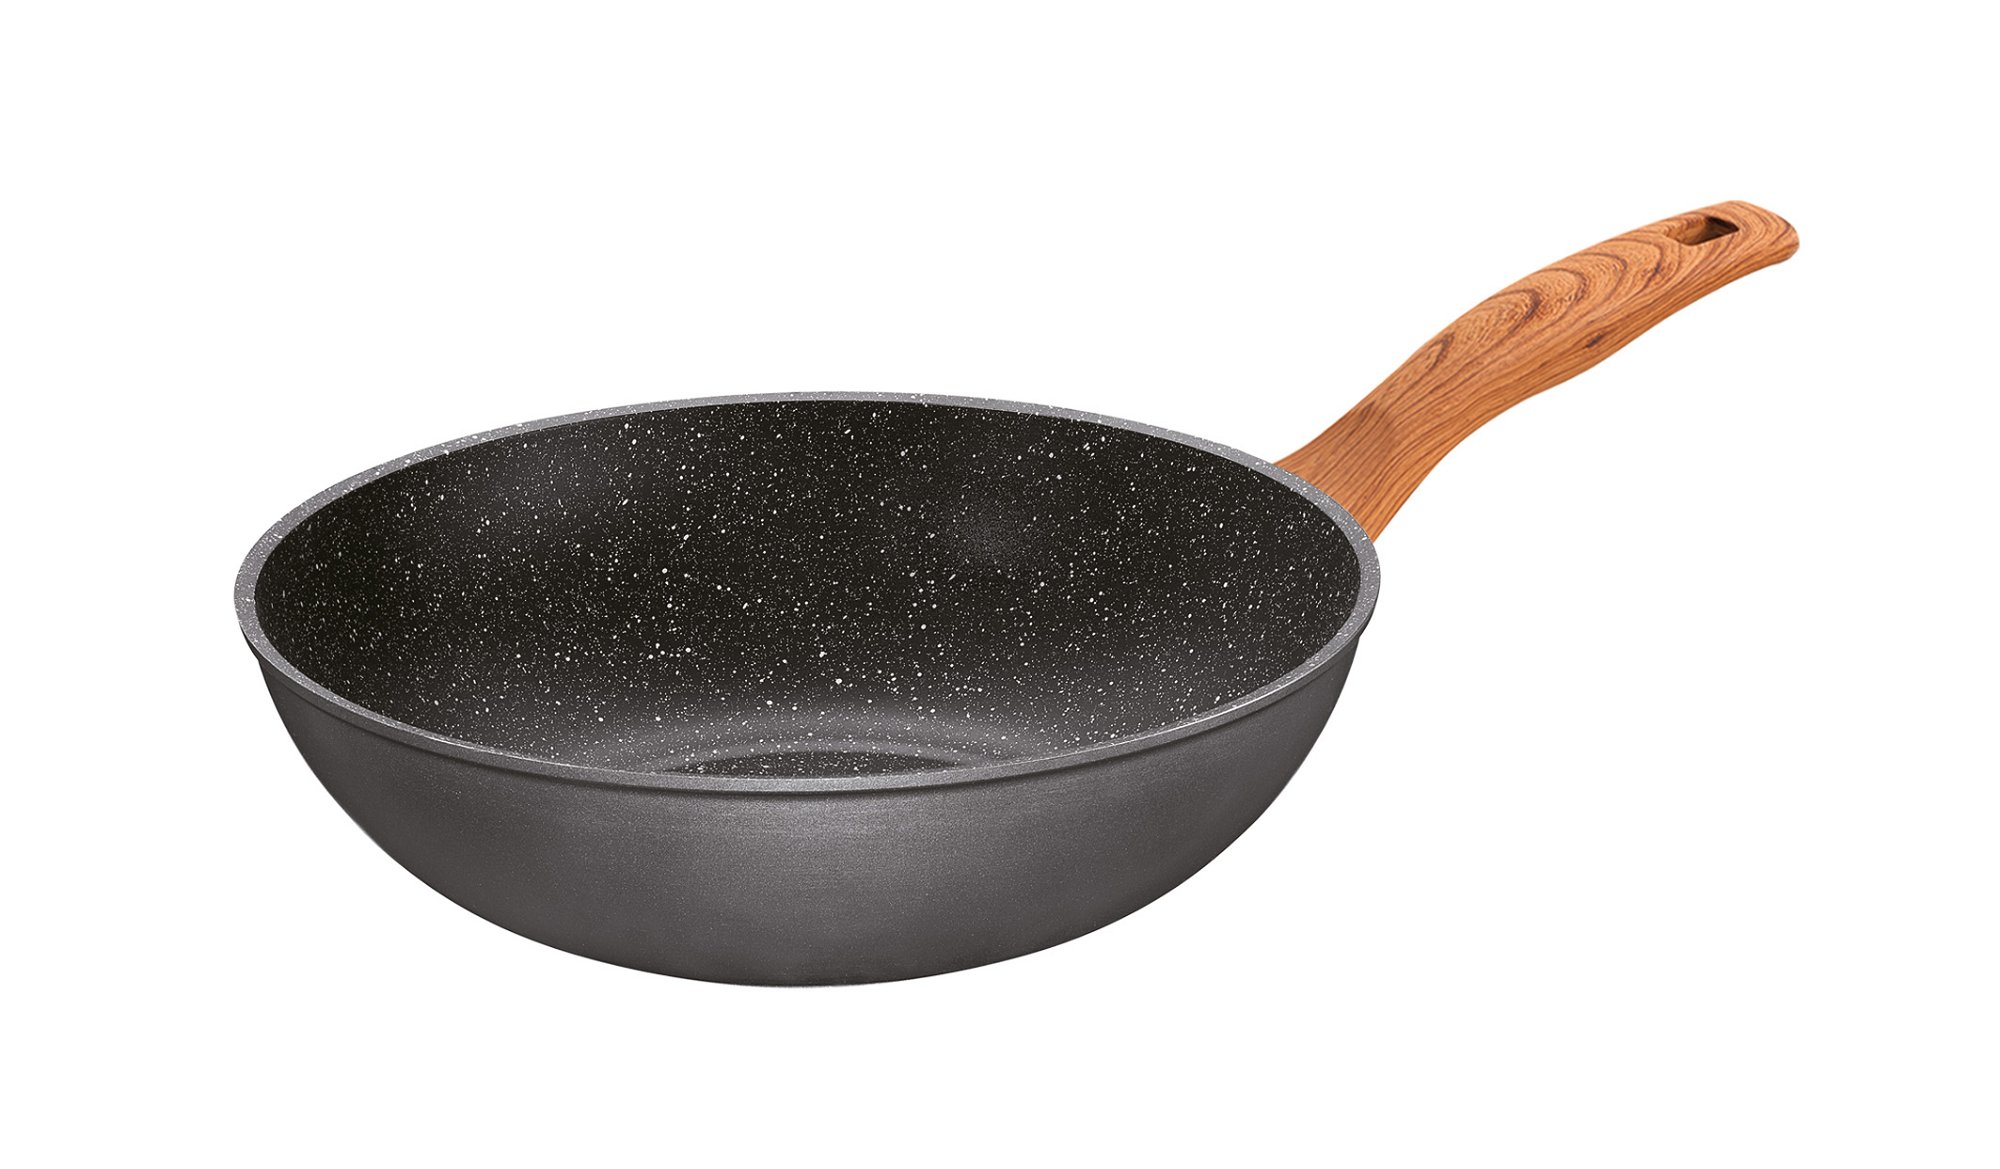 STONELINE® Poêle Wok antiadhésive 30 cm, Motif bois, Made in Germany | Back to Nature